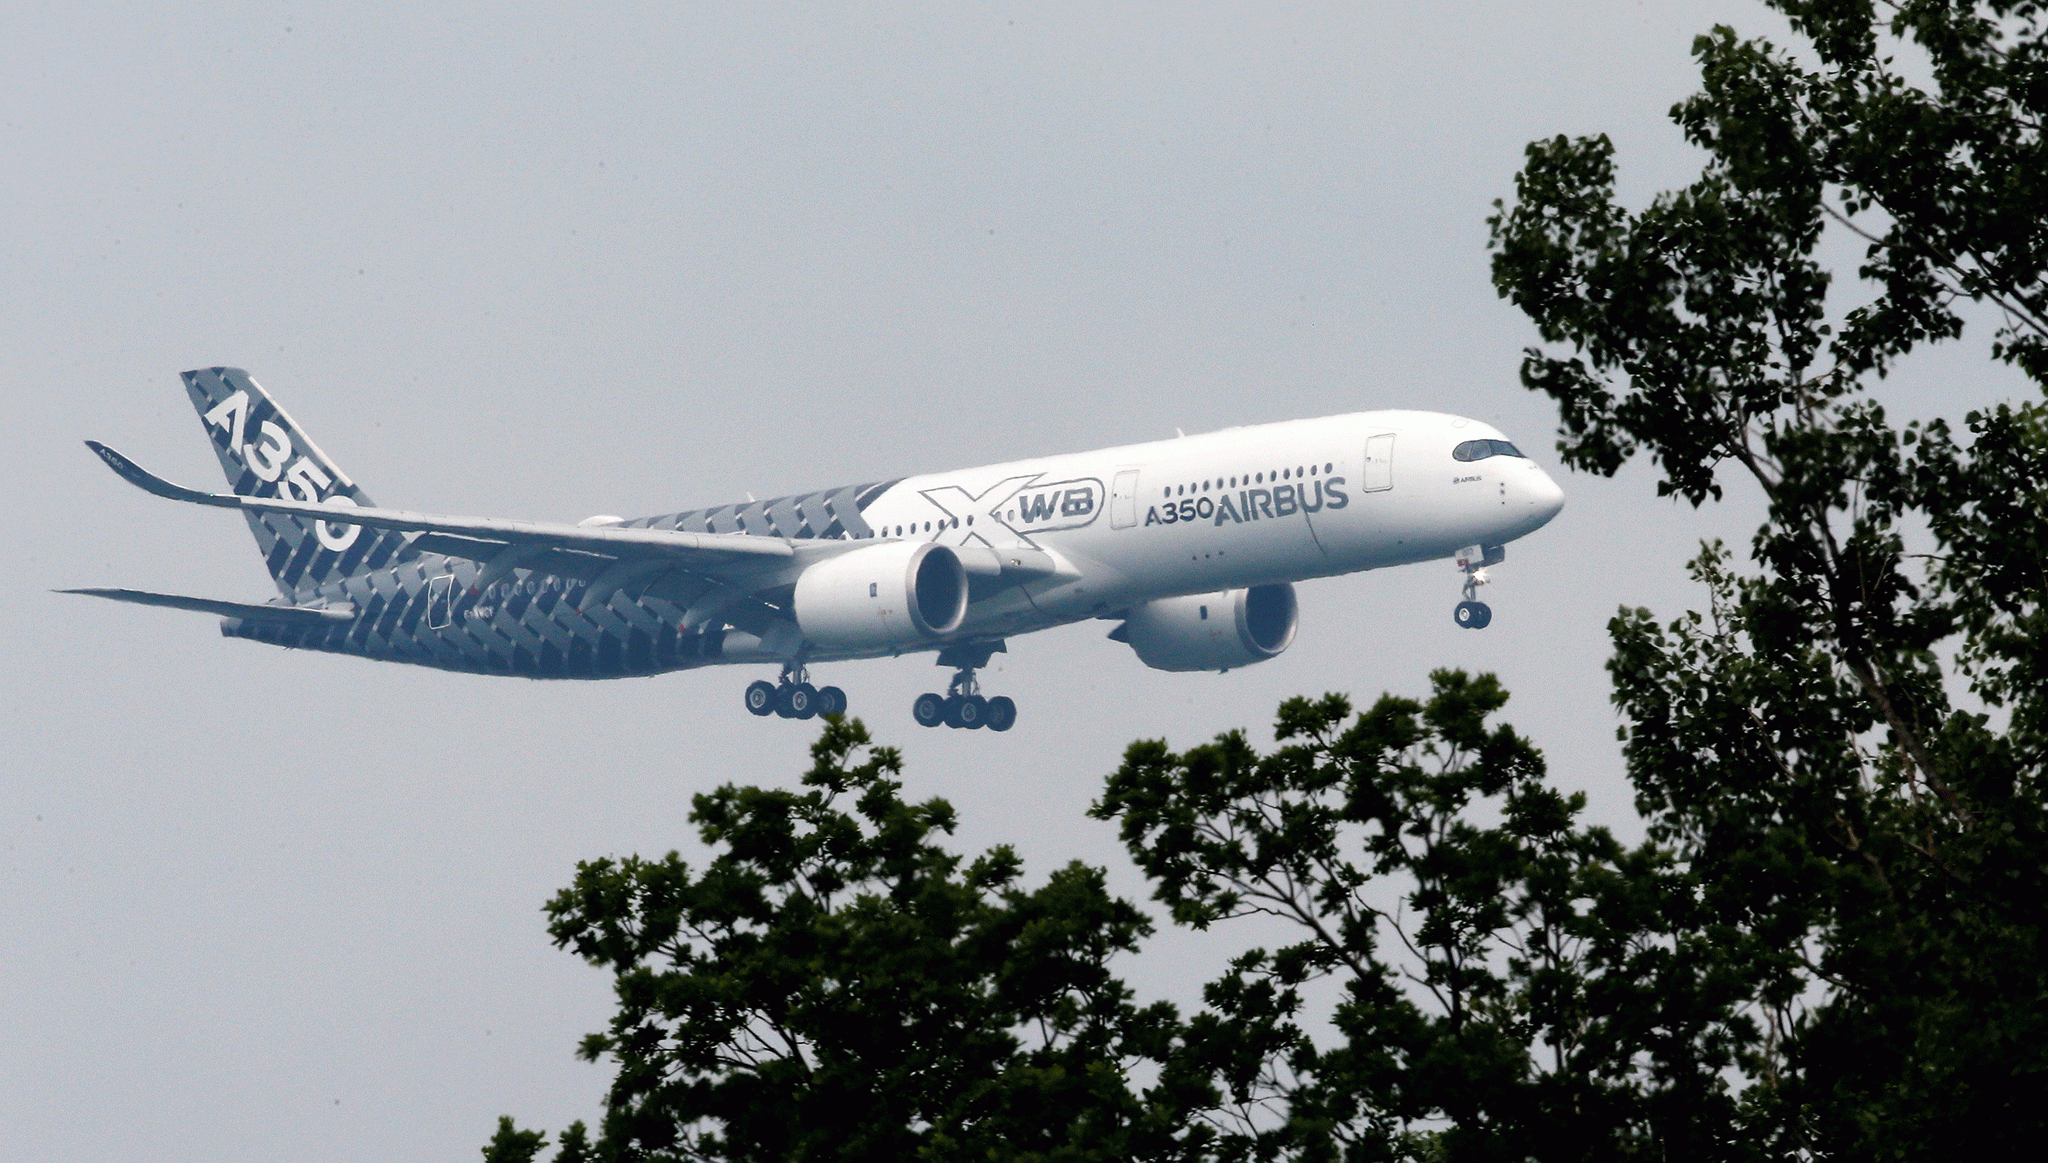 Airbus bribery investigation launched by Serious Fraud Office